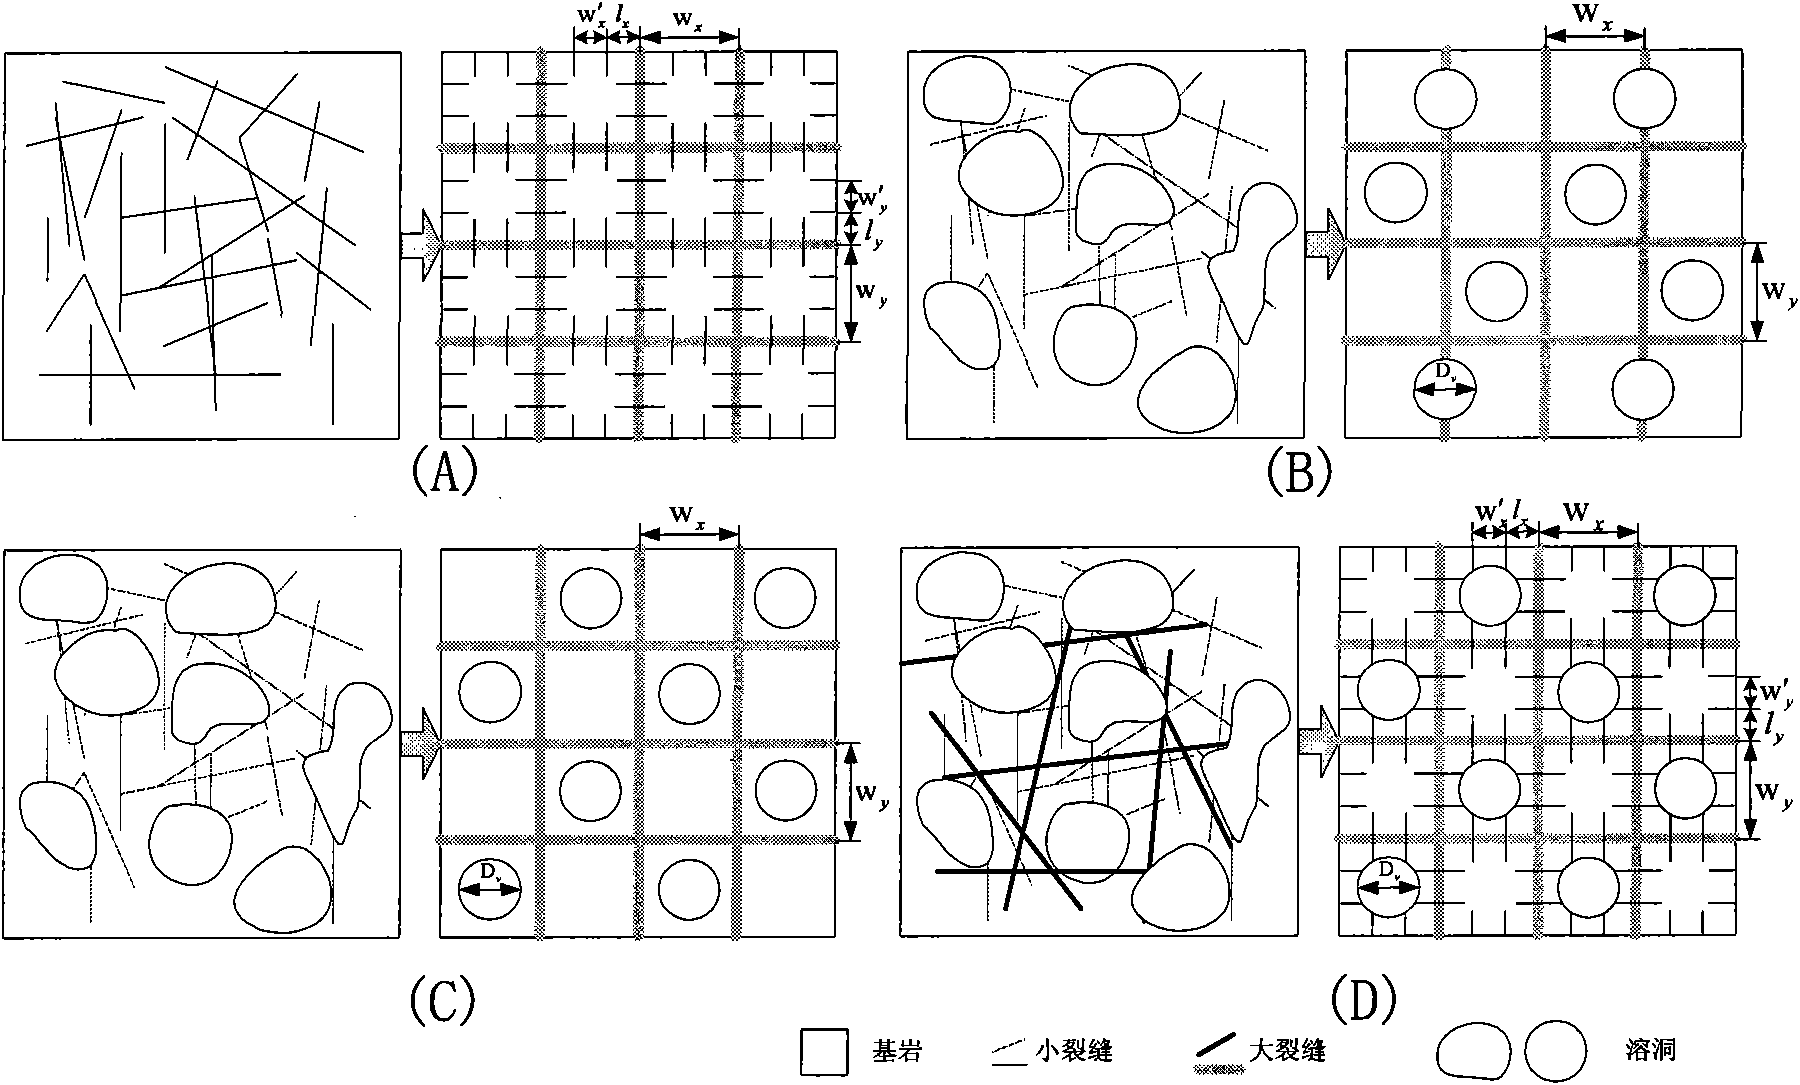 Method for analyzing remaining oil distribution of fractured-vuggy reservoir